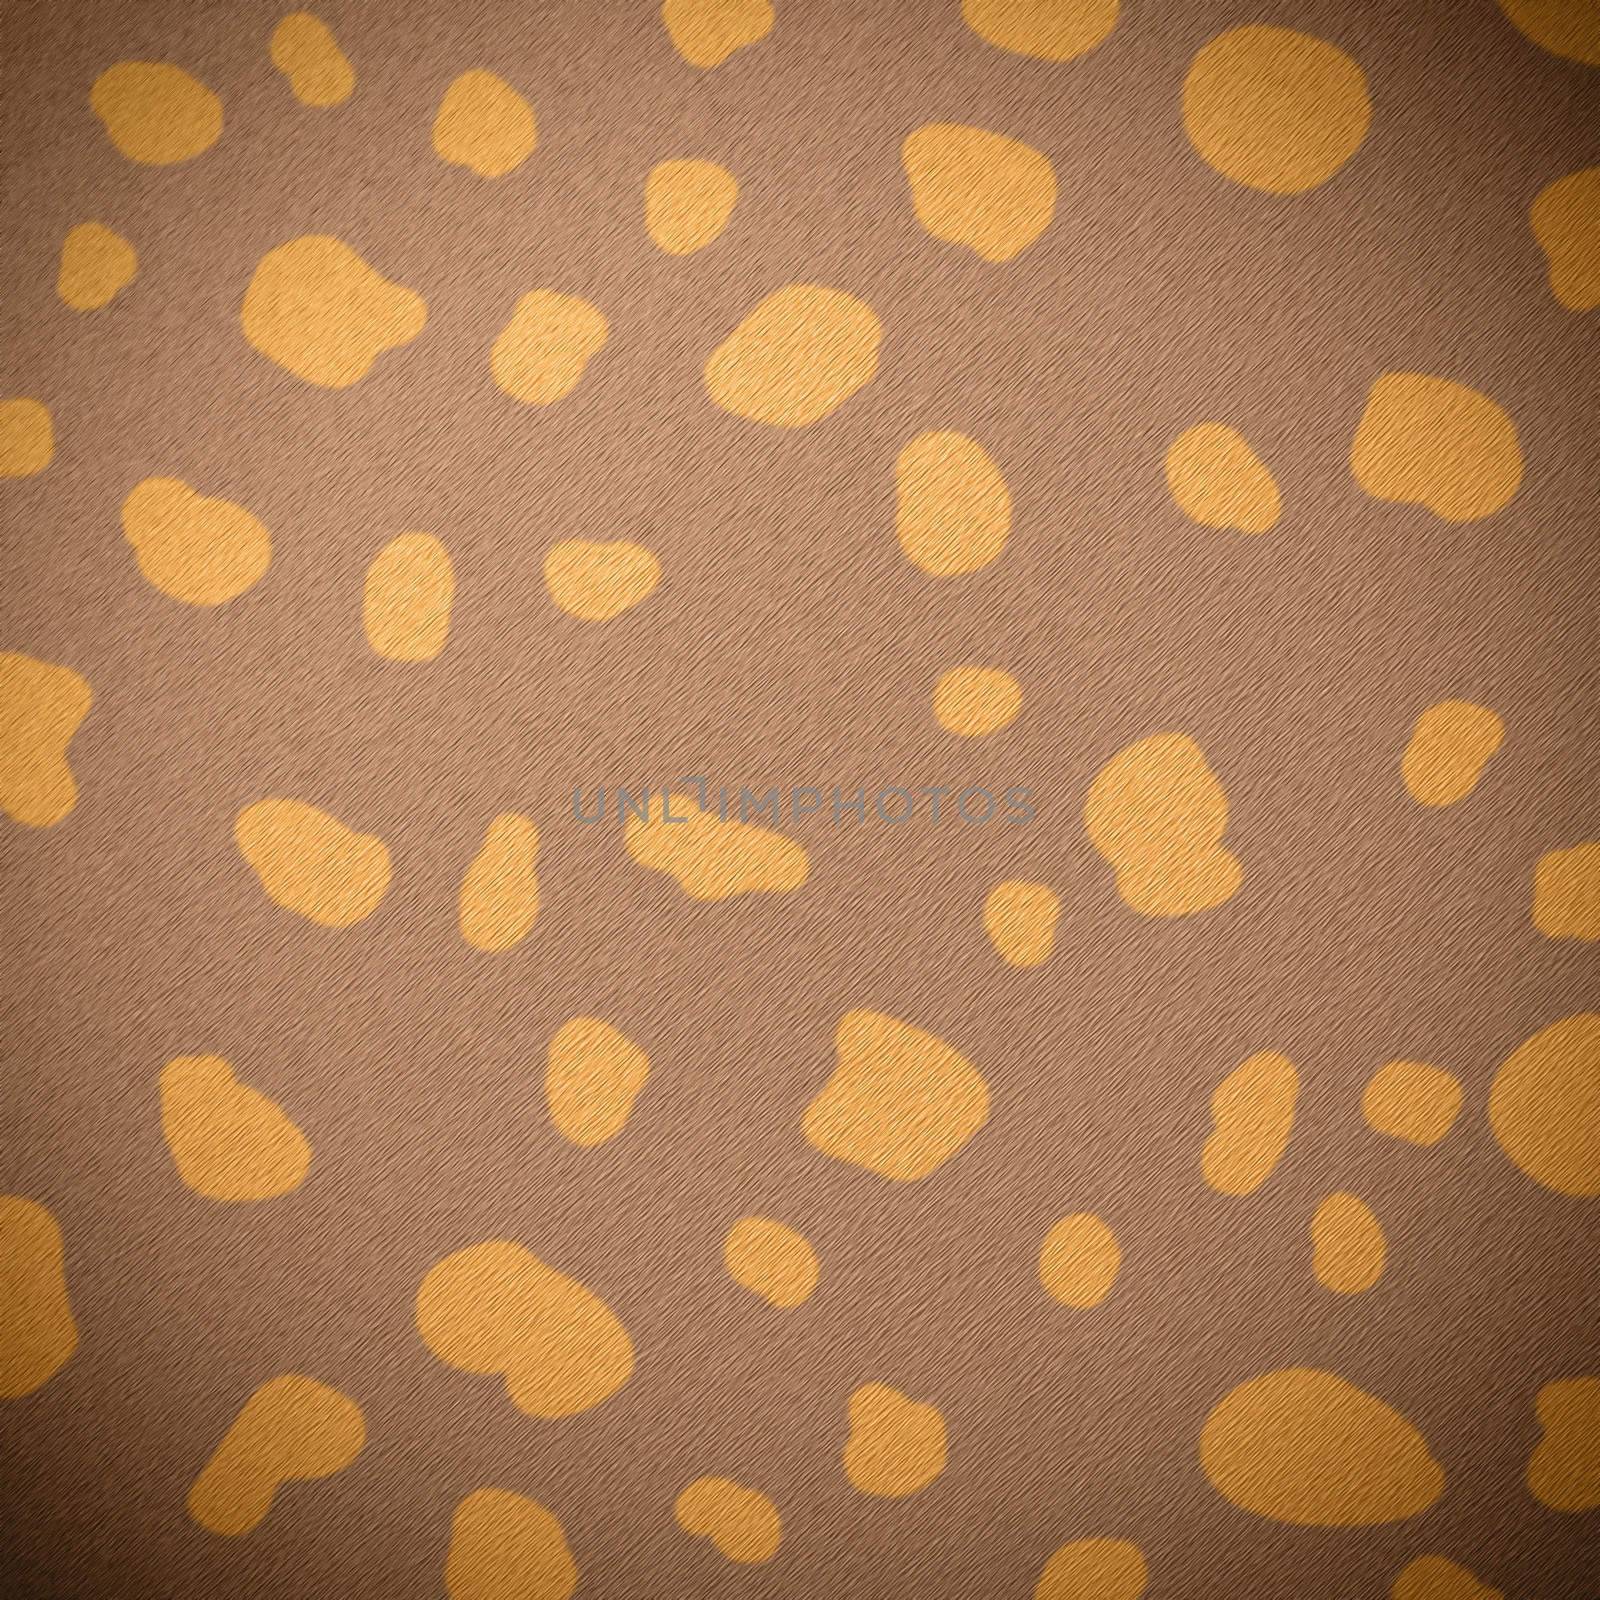 Animal skin texture background with fur and spot.